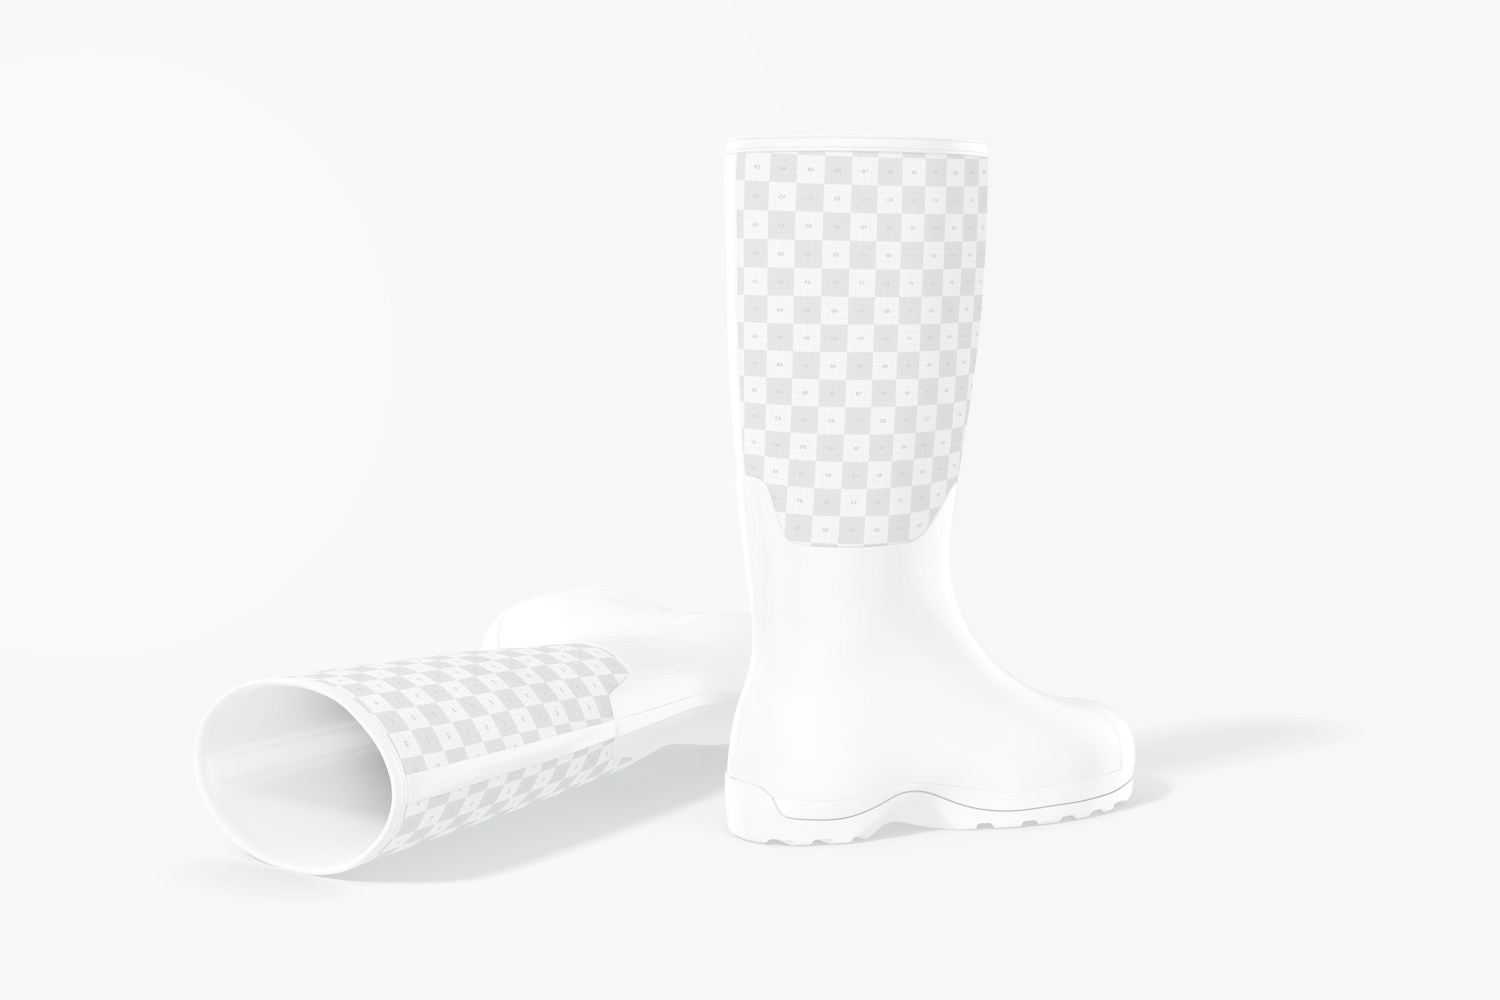 Rubber Boots Mockup, Standing and Dropped